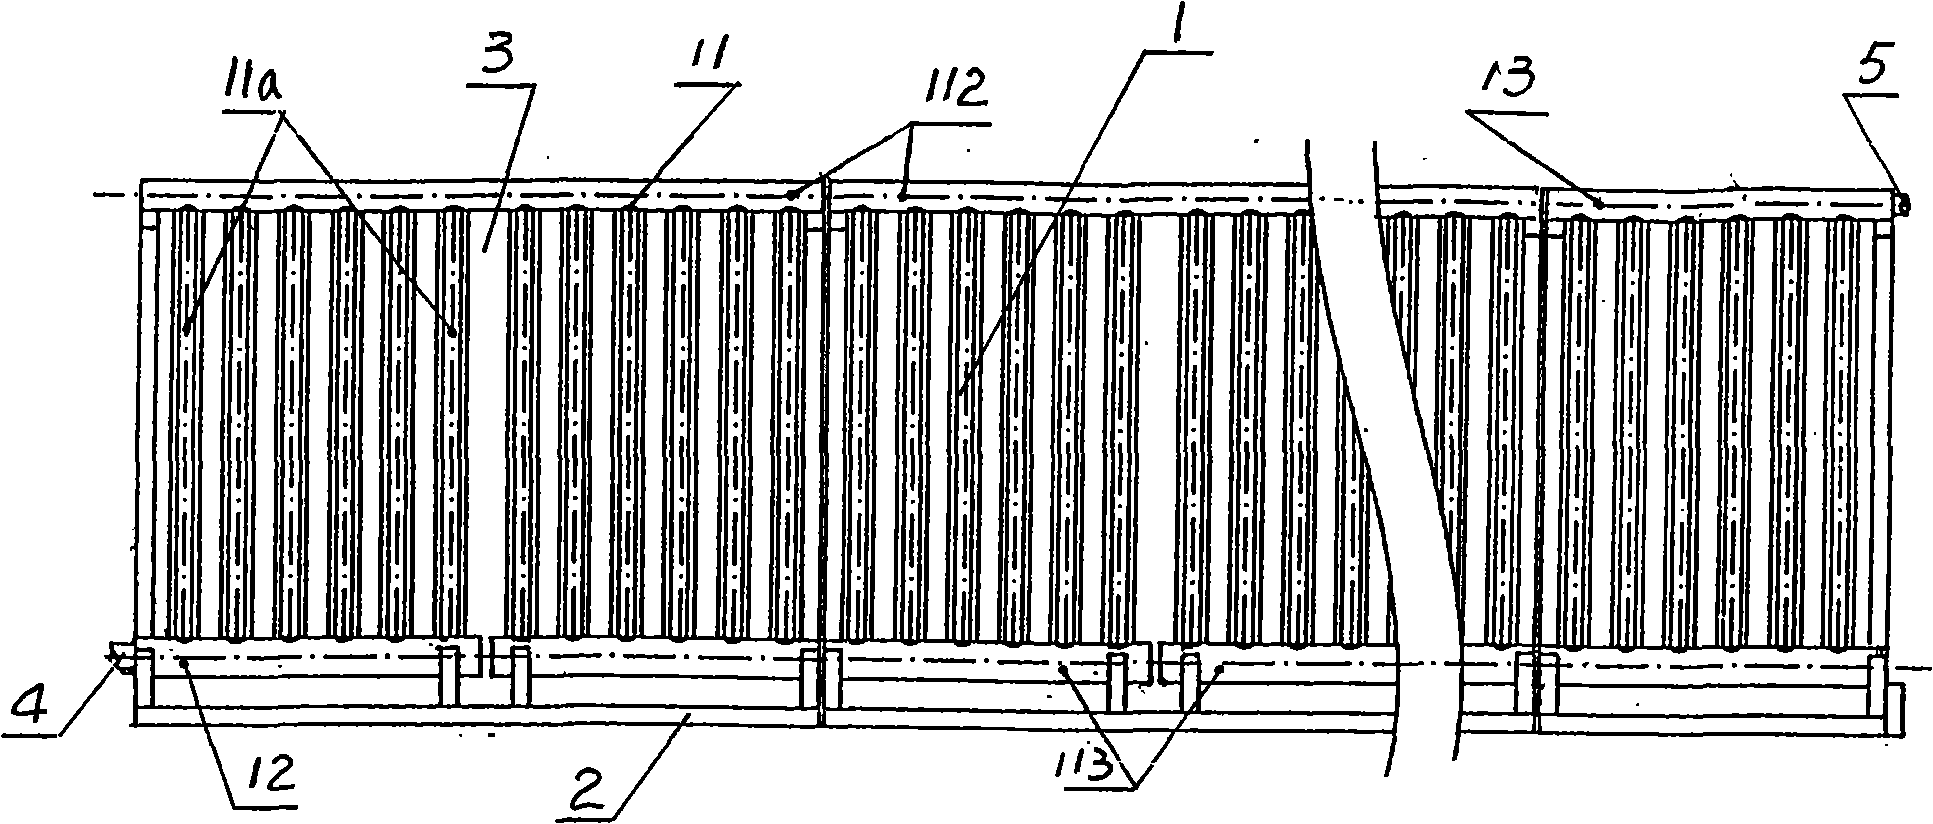 Solar continuous water heating apparatus